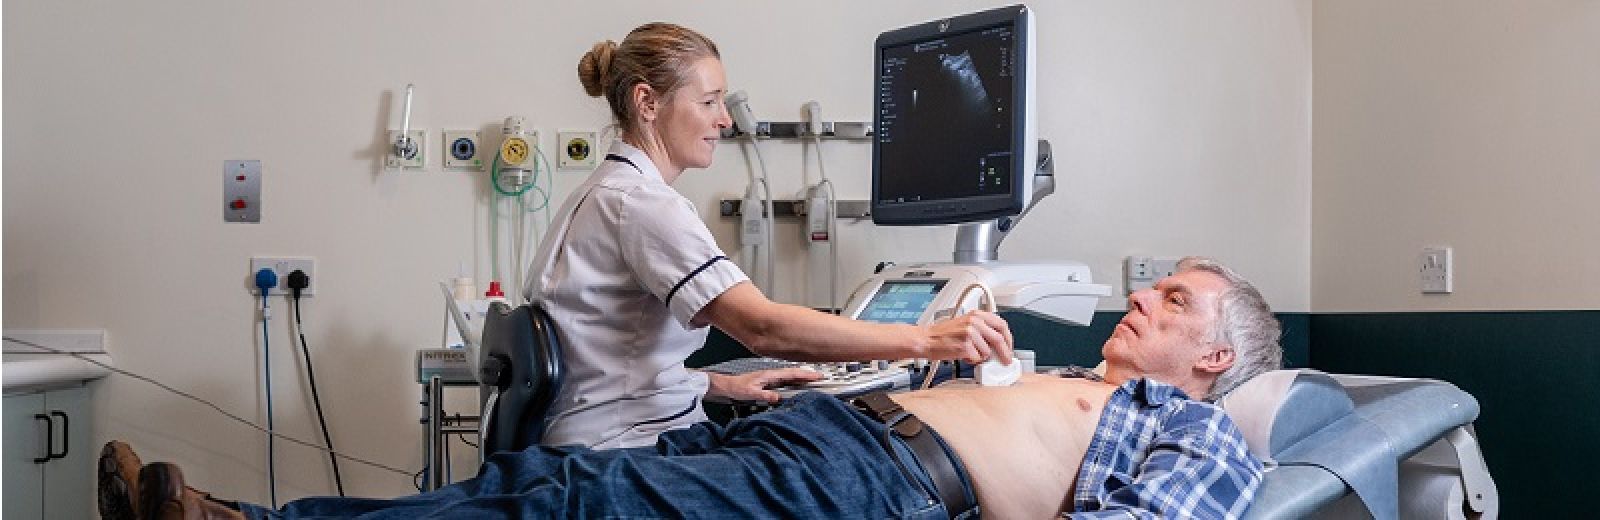 the postgraduate ultrasound diagnostic imaging course trains professionals to scan patients using ultrasound